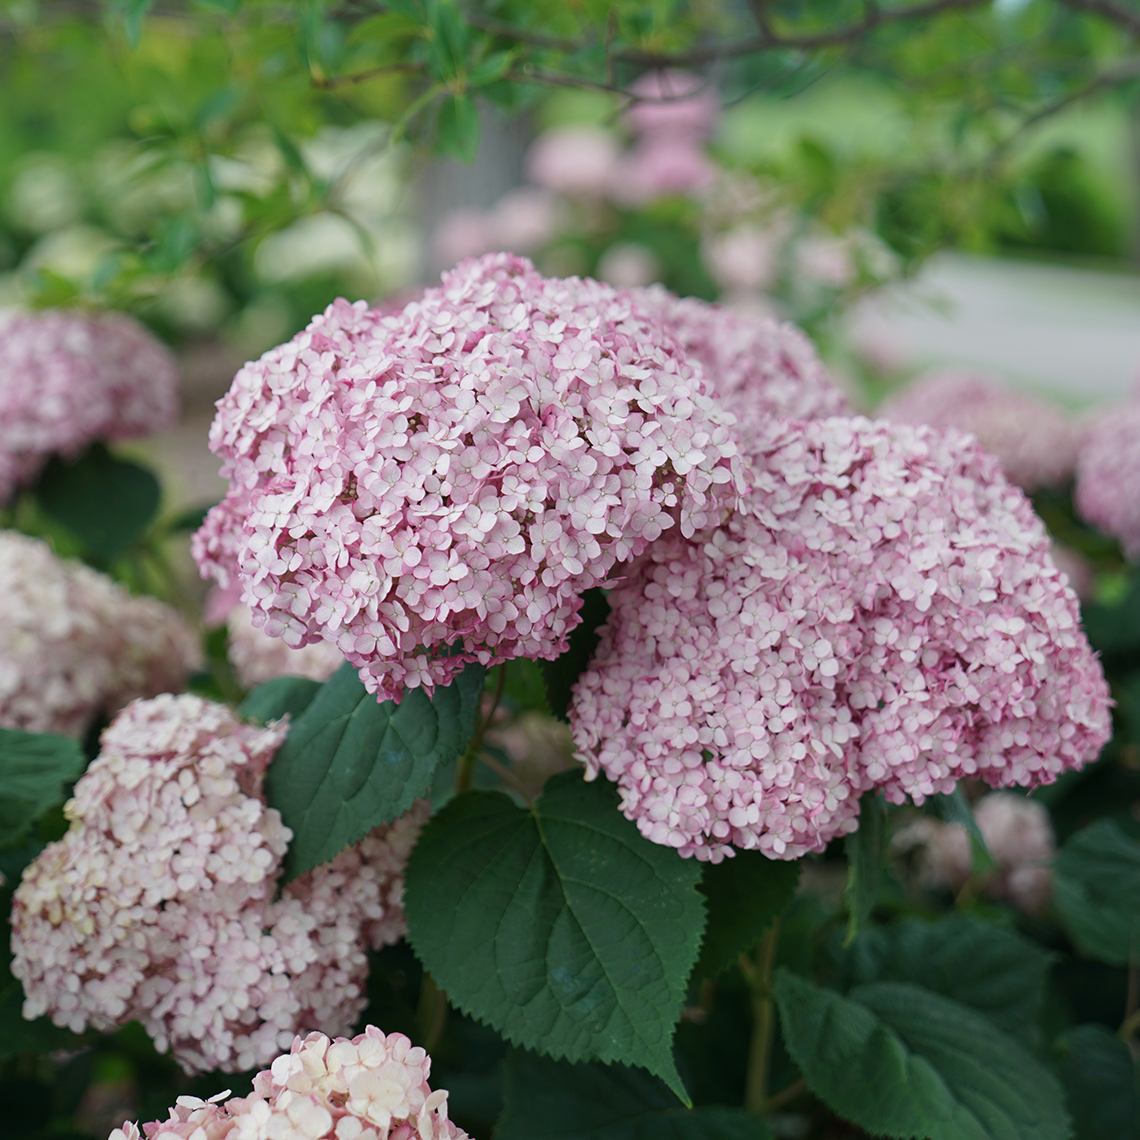 The large pink blooms of Incrediball Blush hydrangea contrasting with the deep blue-green foliage